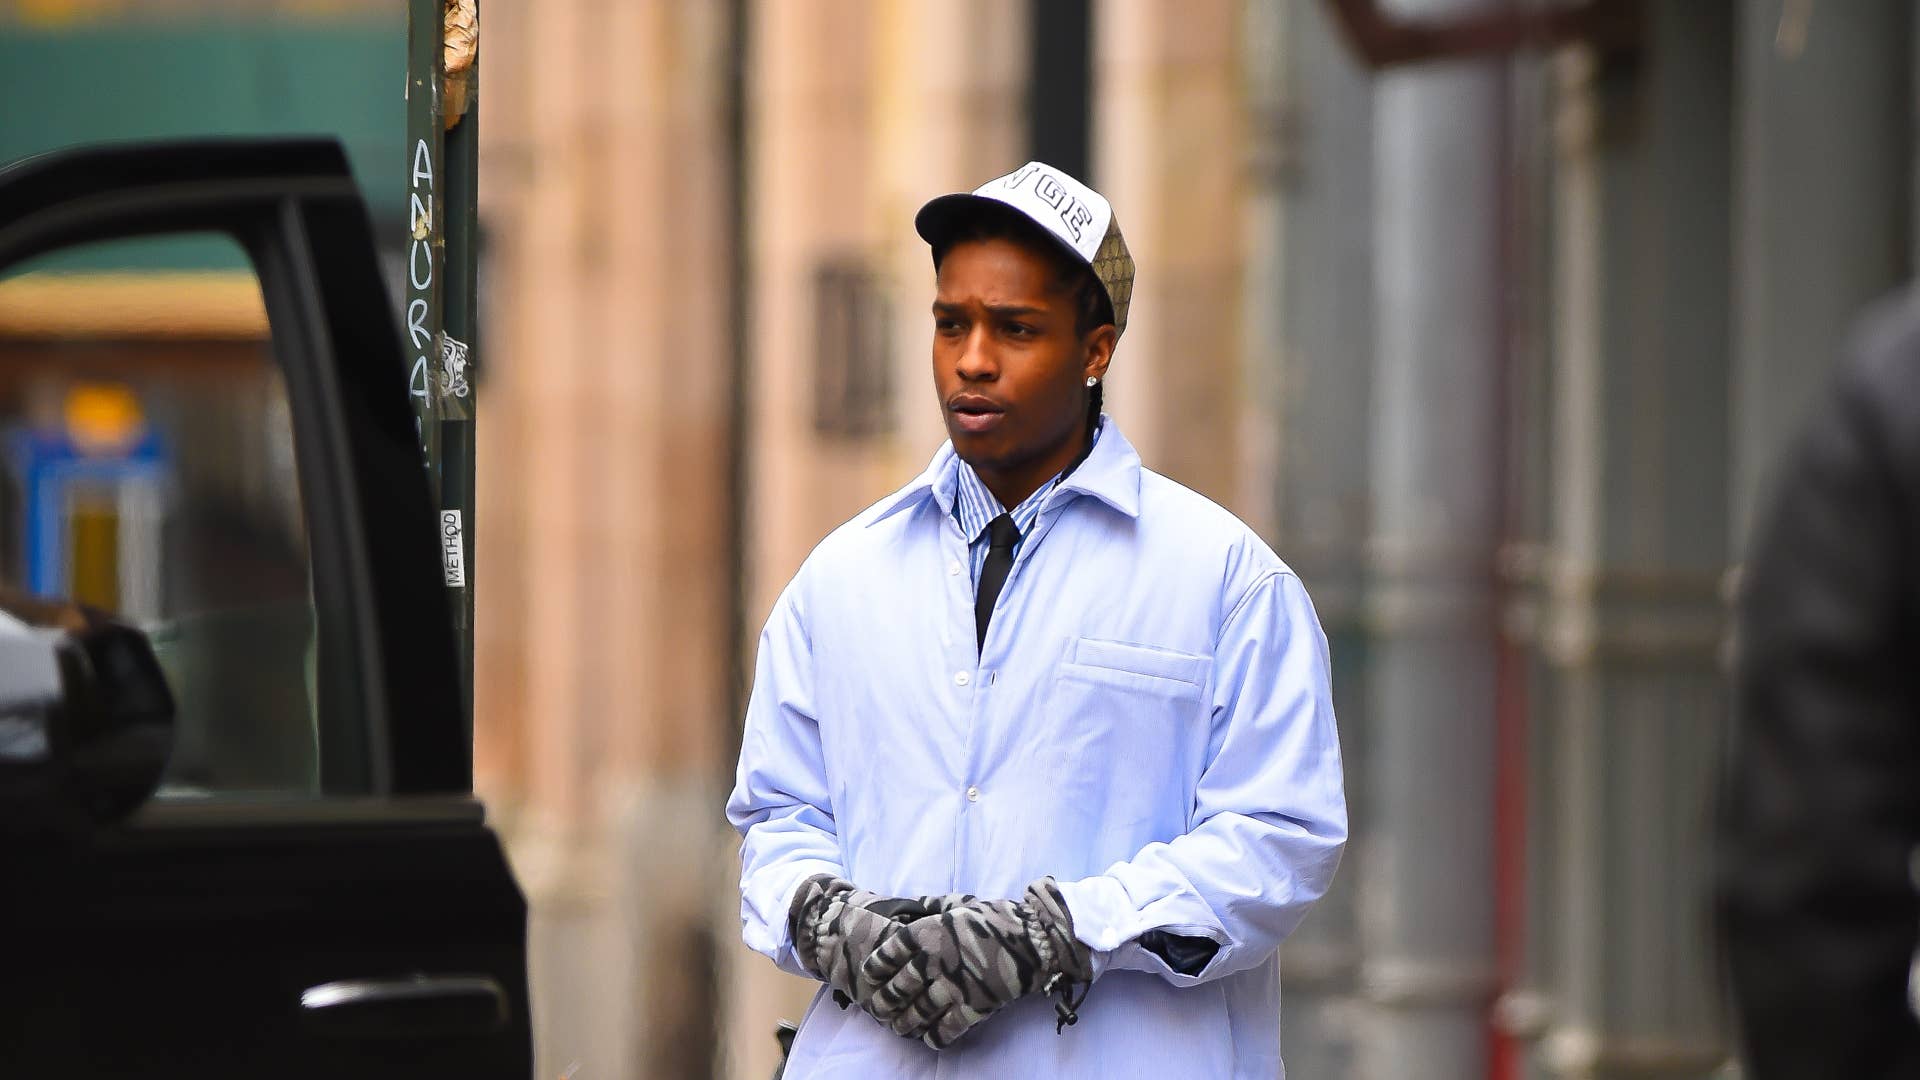 ASAP Rocky Wore a New Jersey High School Varsity Jacket While Out